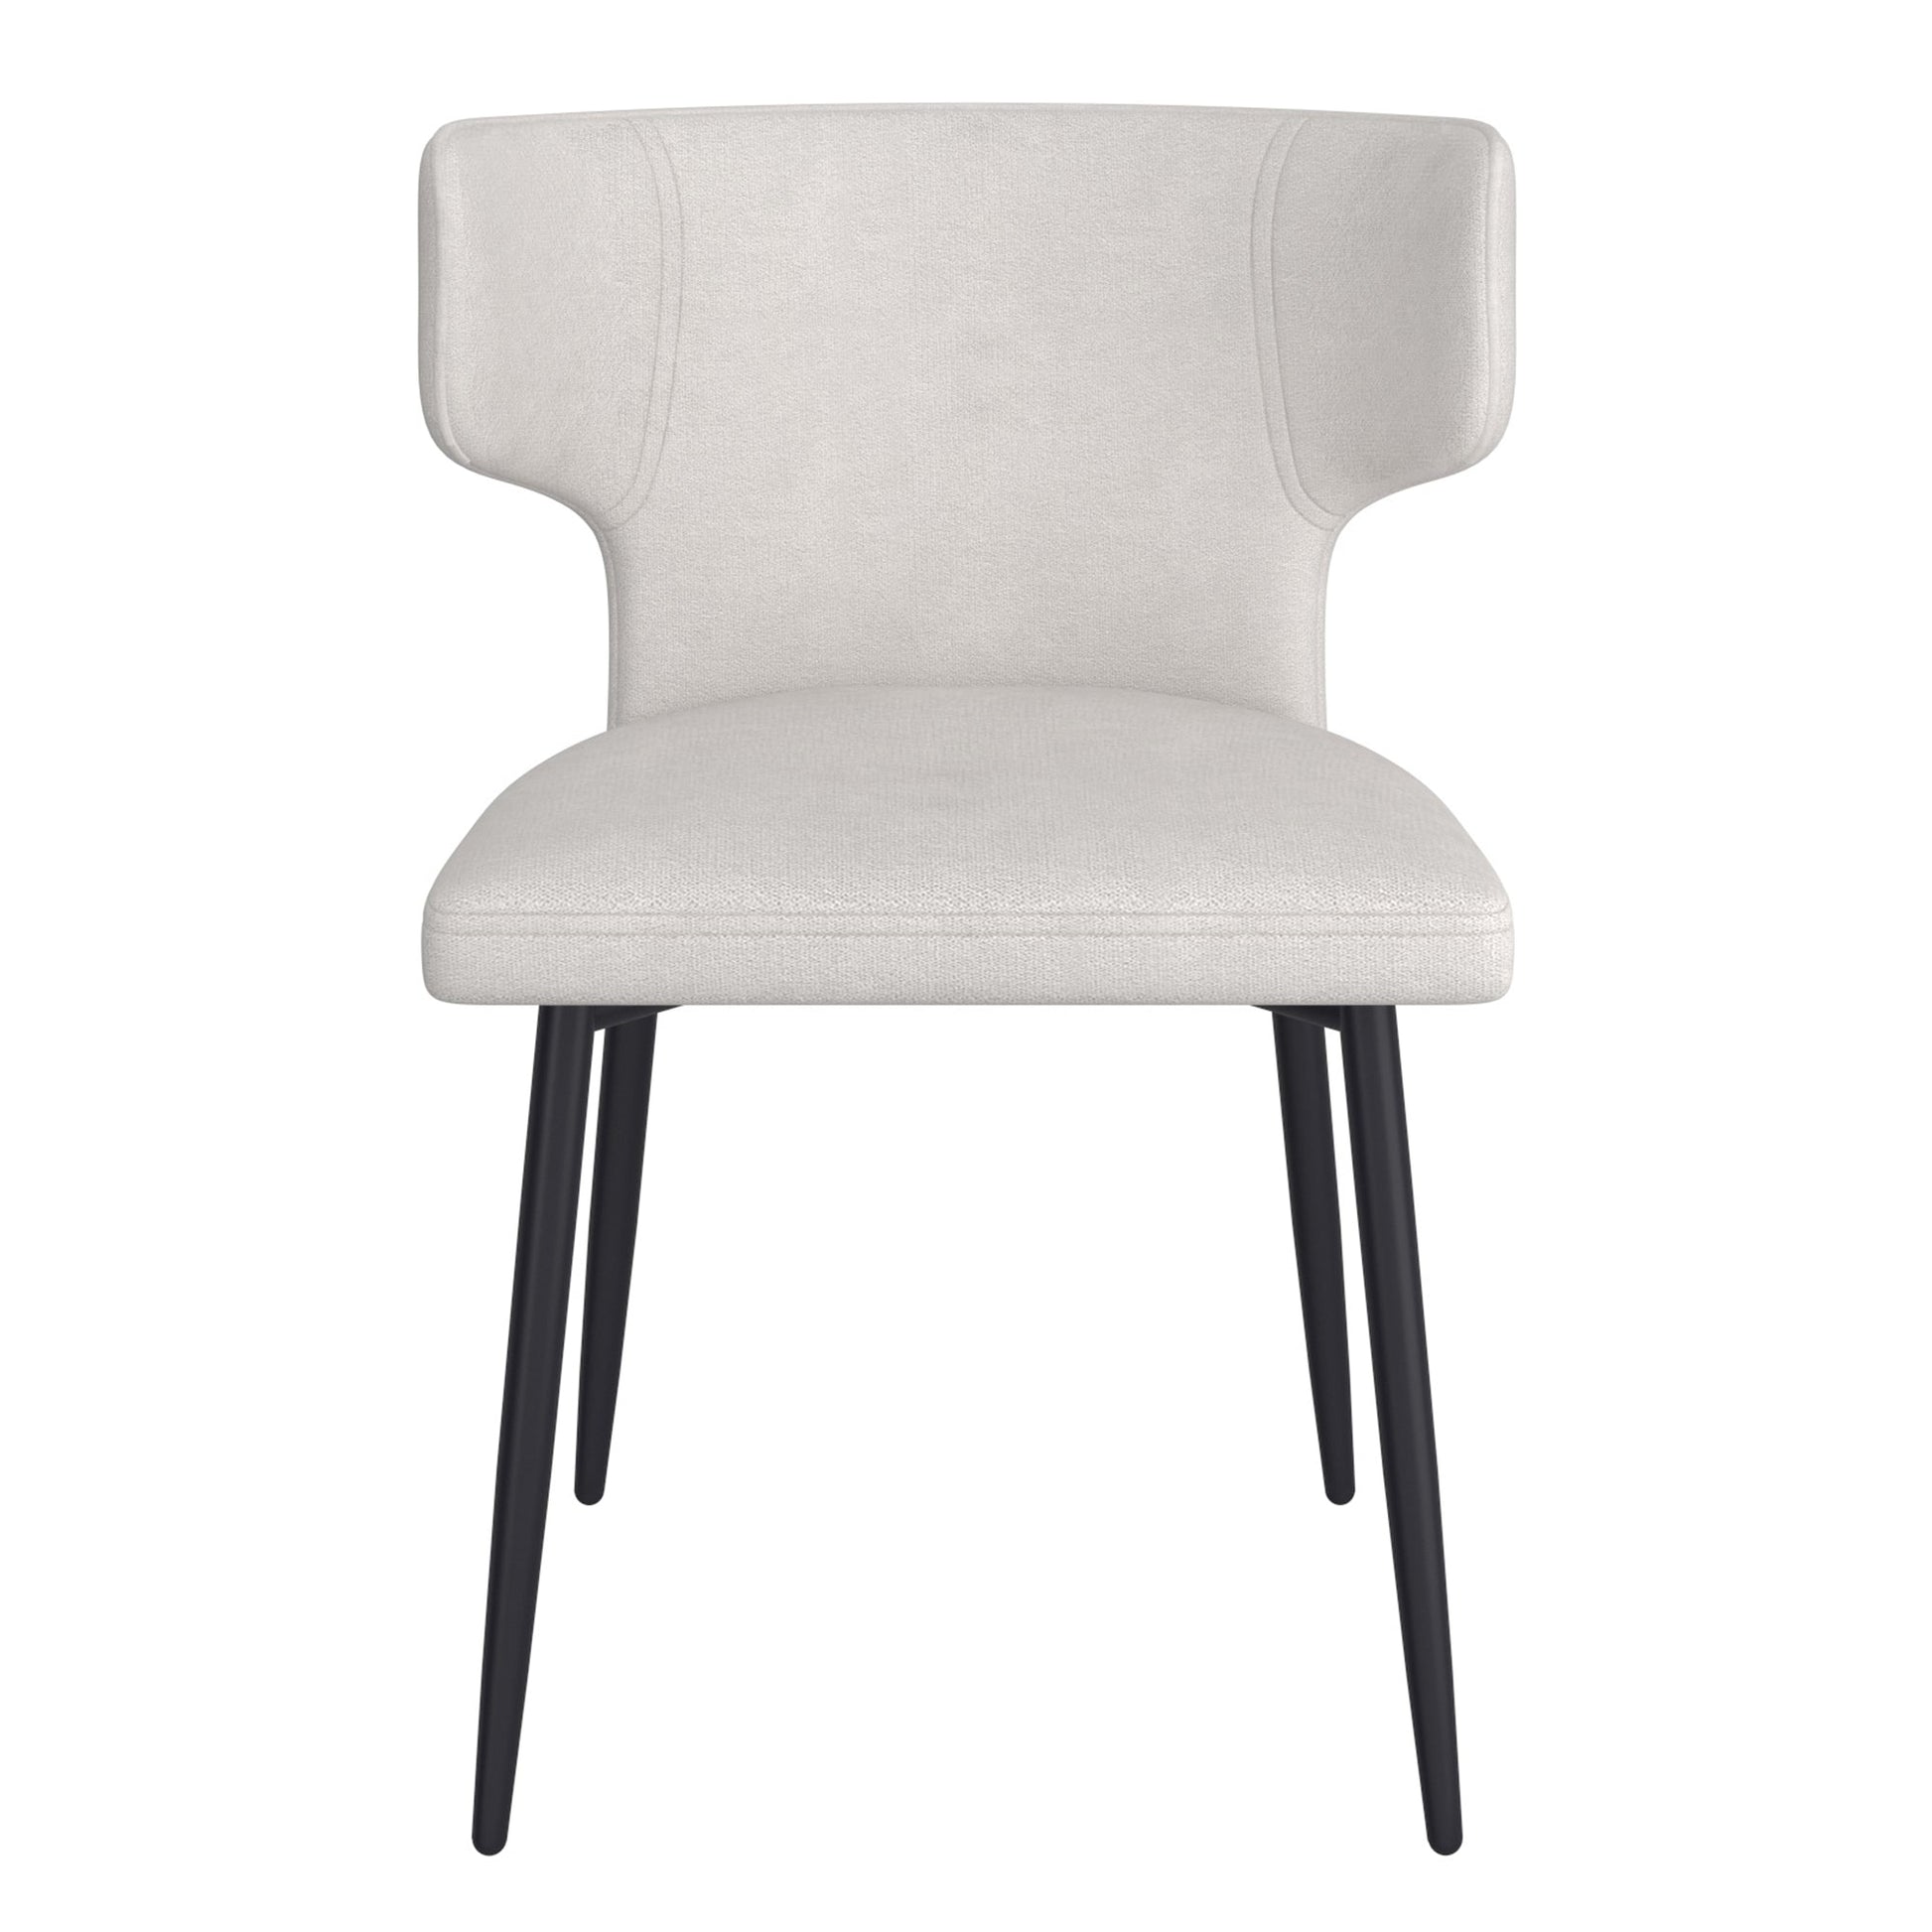 Curvy Back Dining Chairs | Set of 2 | Olis Beige Fabric - Your Bar Stools Canada